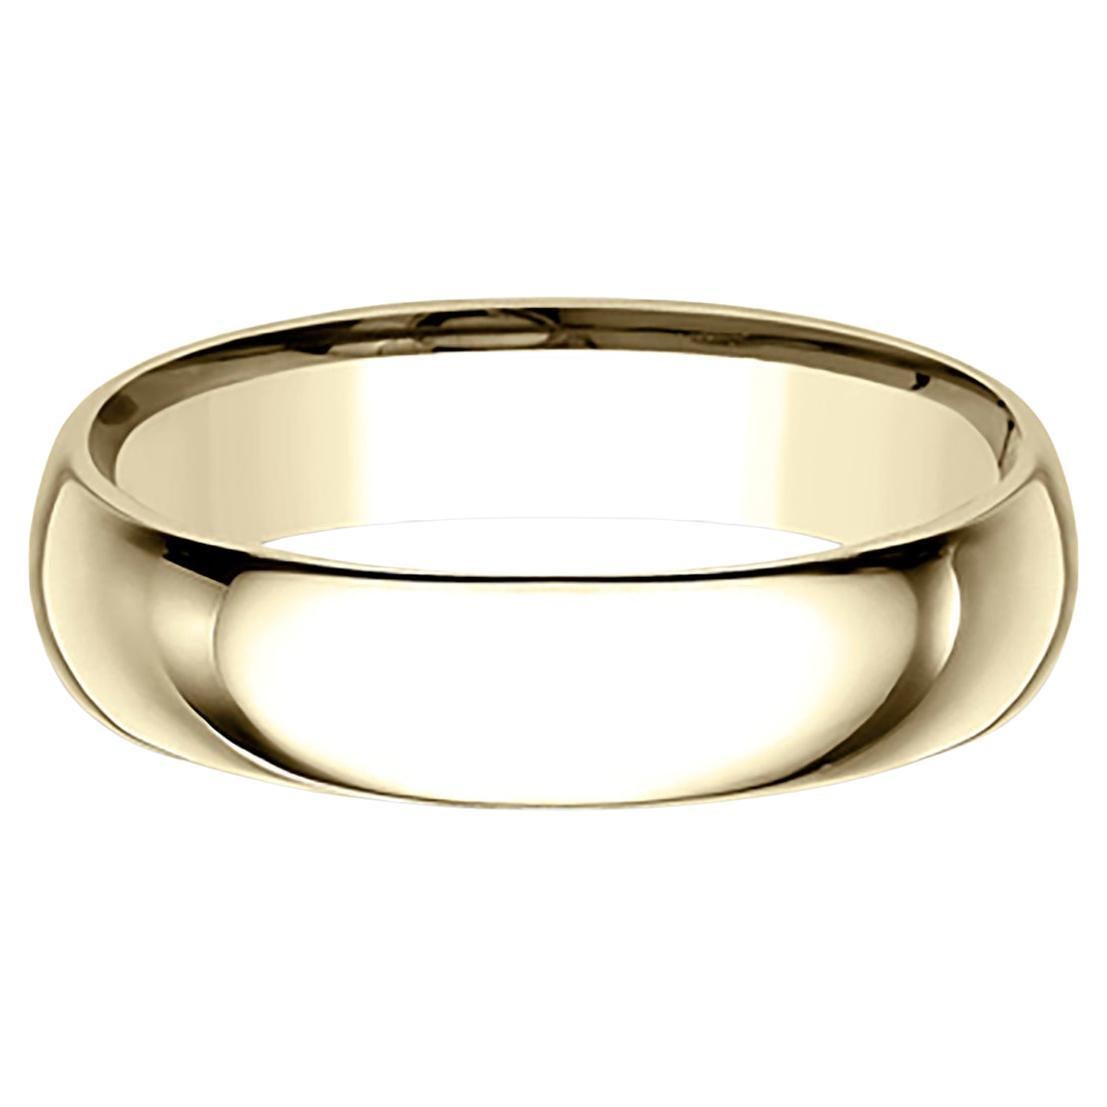 Benchmark Classic Comfort Fit Wedding Band in 14K Yellow Gold, Width 5mm